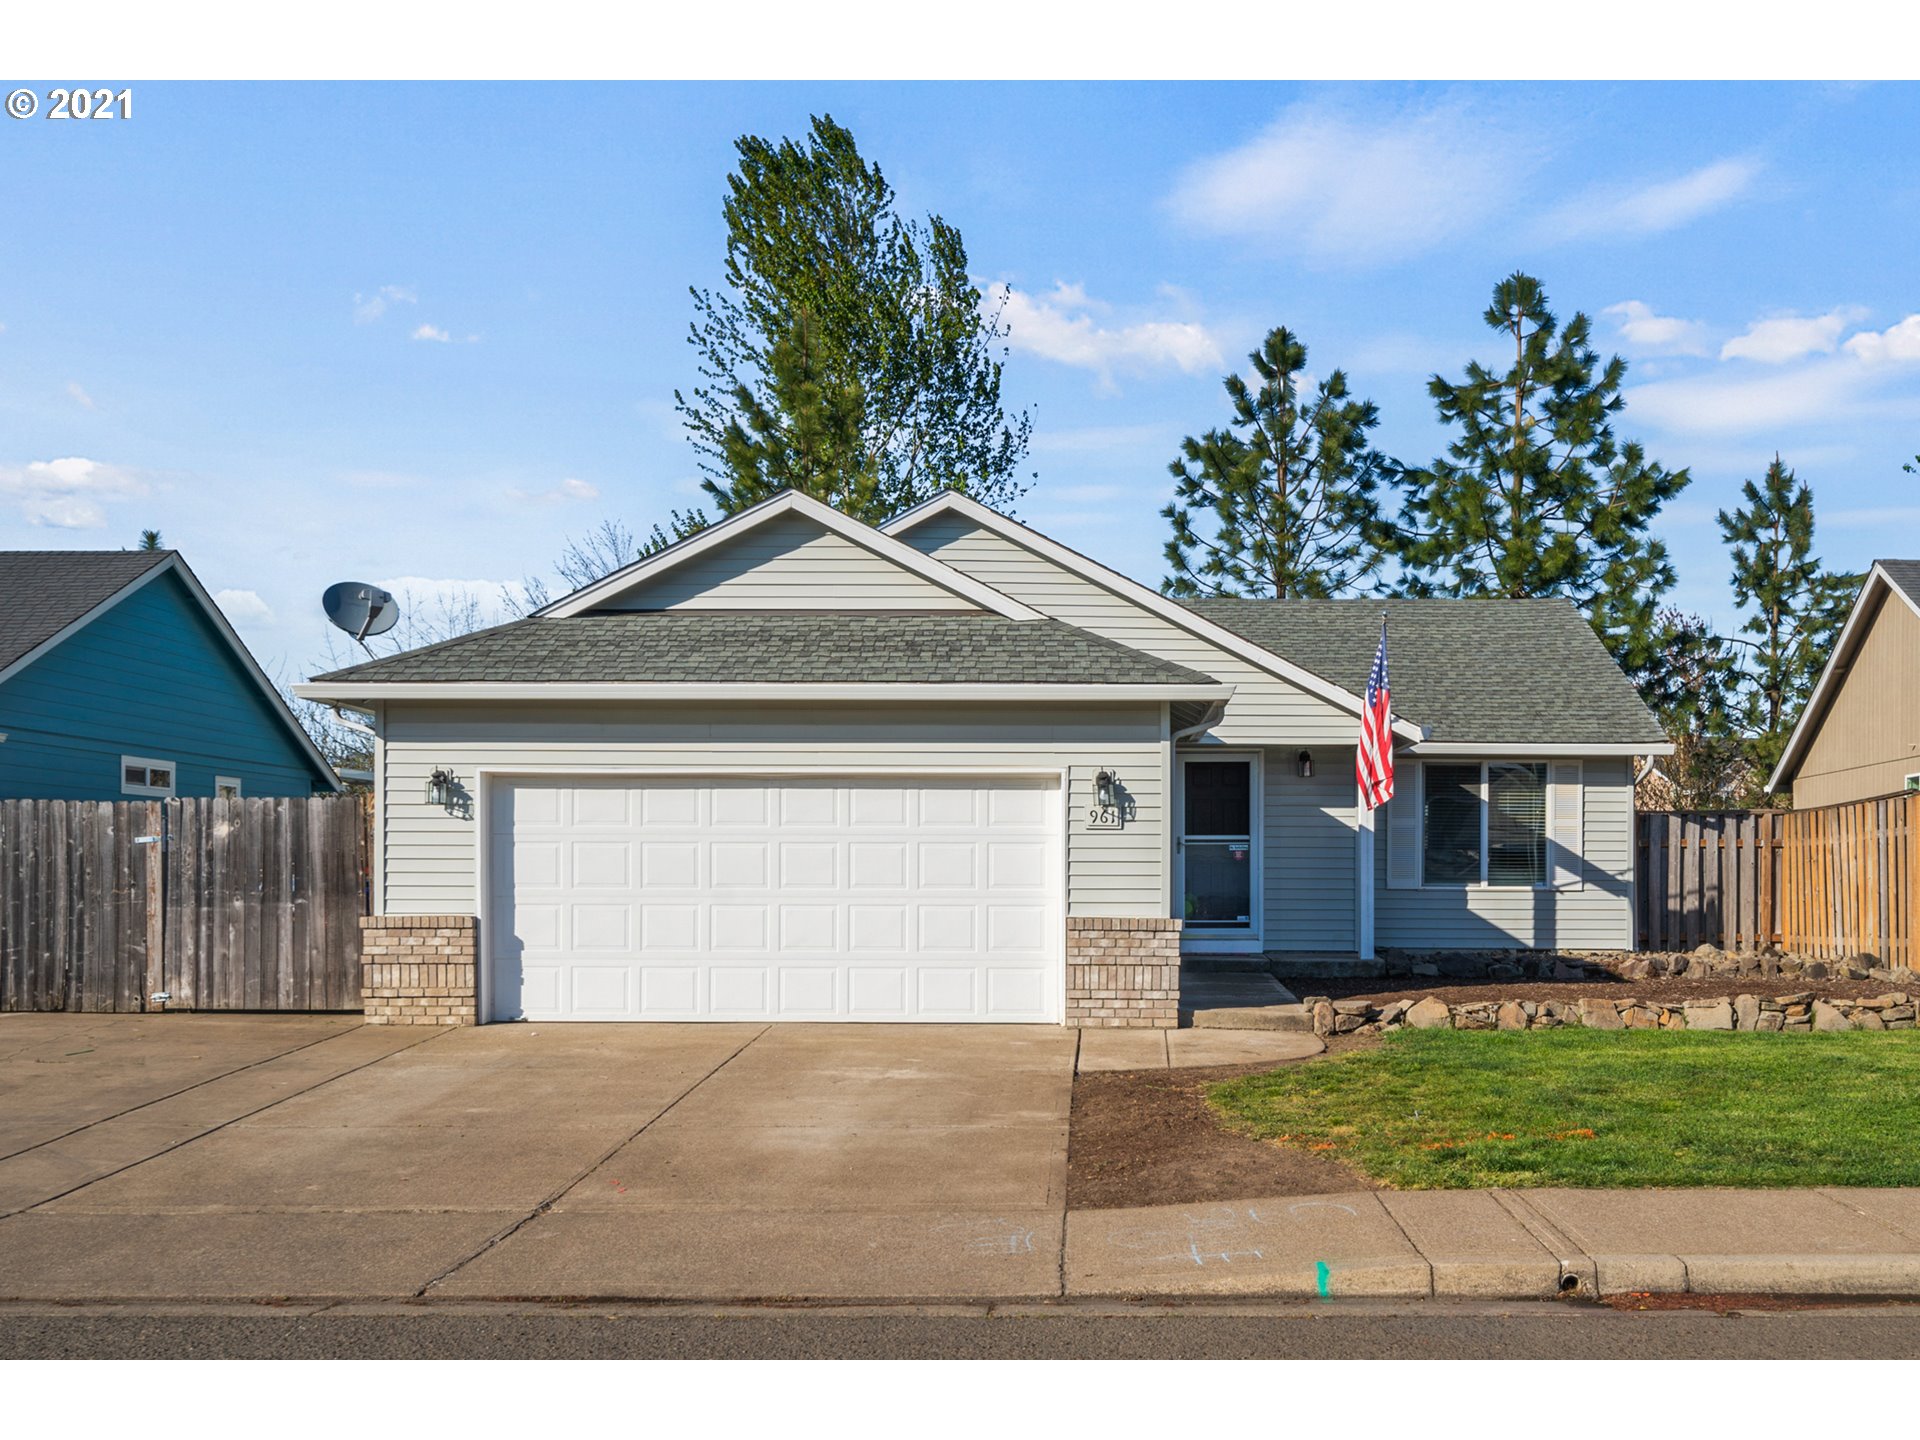 961 MT VIEW LN (1 of 22)